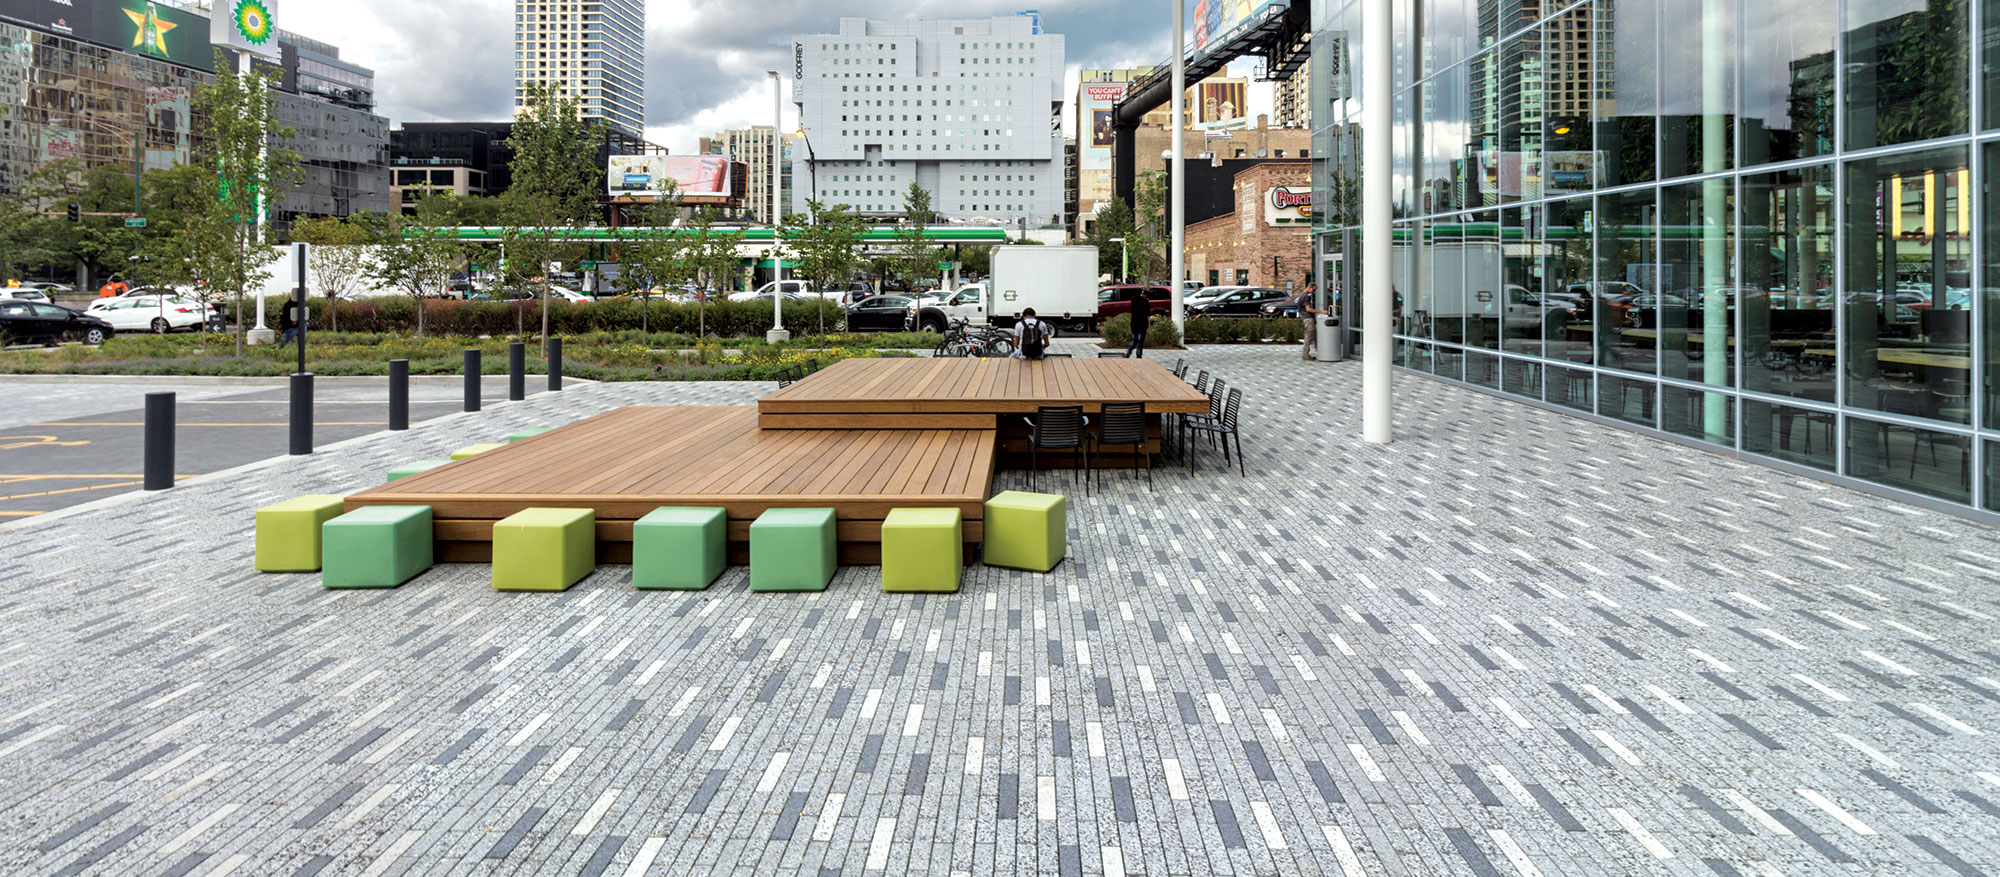 Eco-Promenade permeable pavers in different tones from white to dark grey with a speckled finish hold colorful seating blocks and tables.